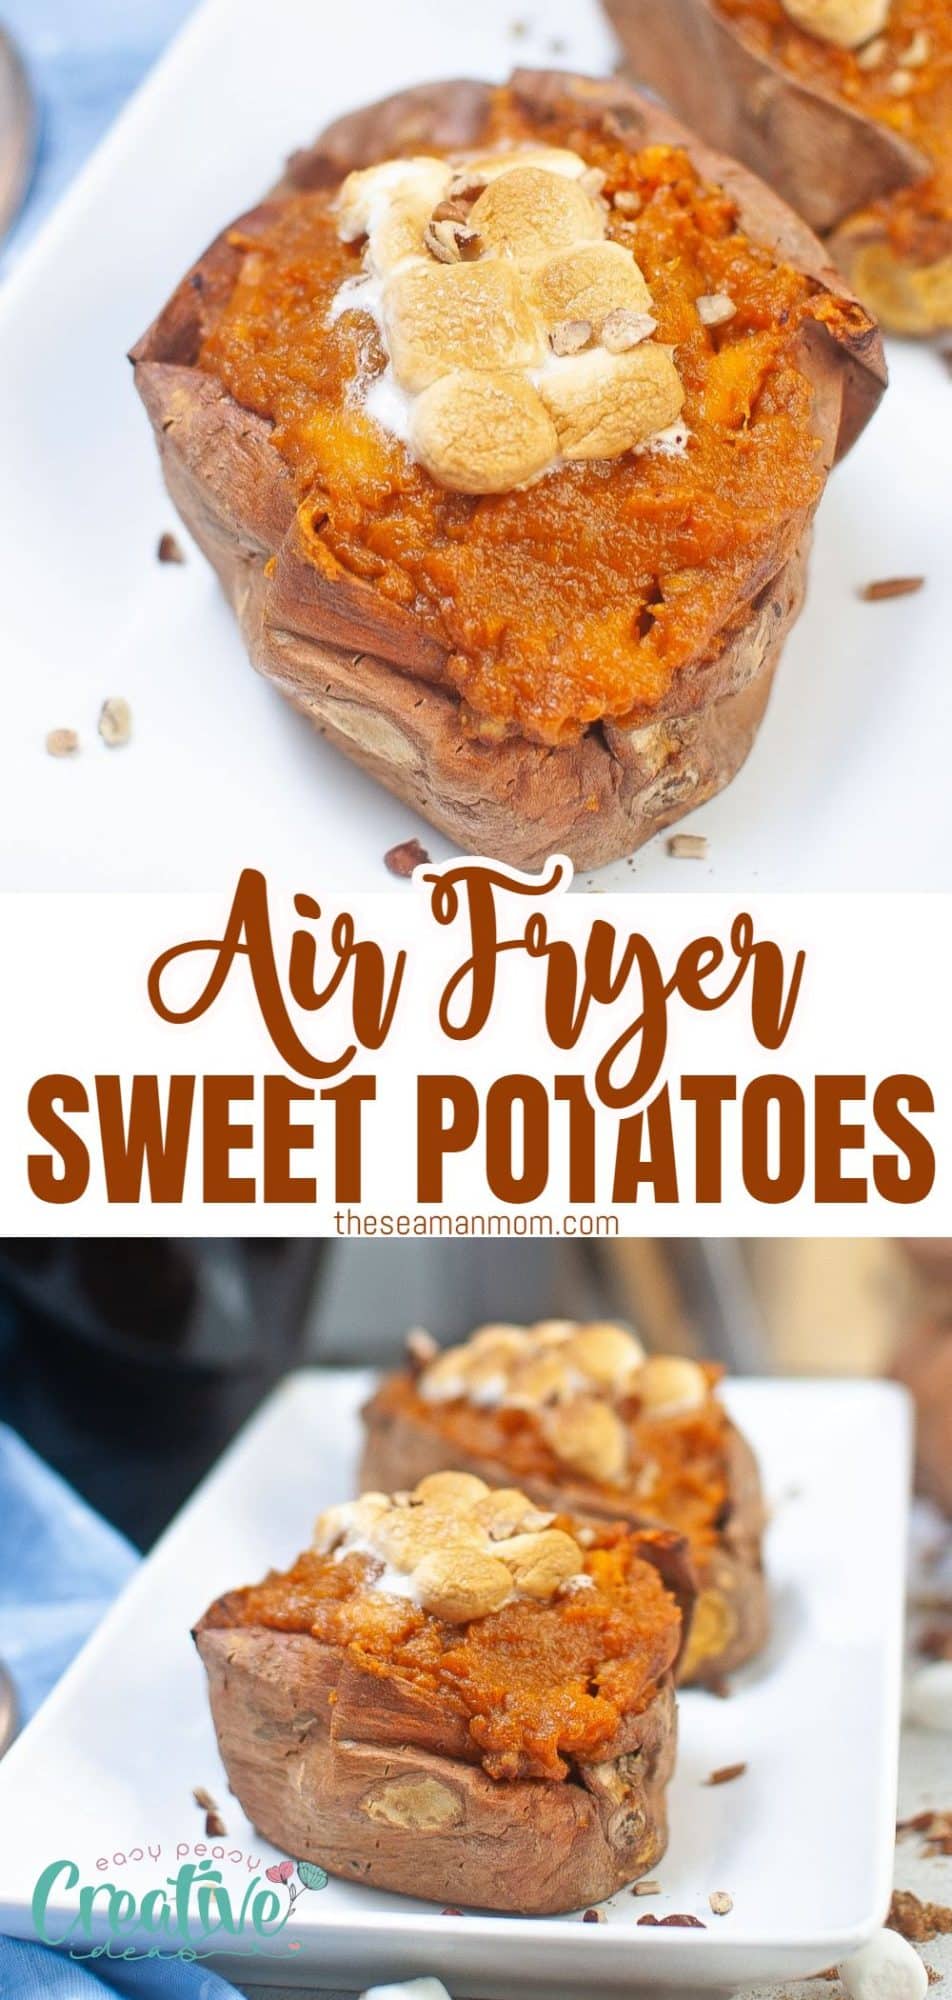 Air fryer baked sweet potato with marshmallow and pecan toppings